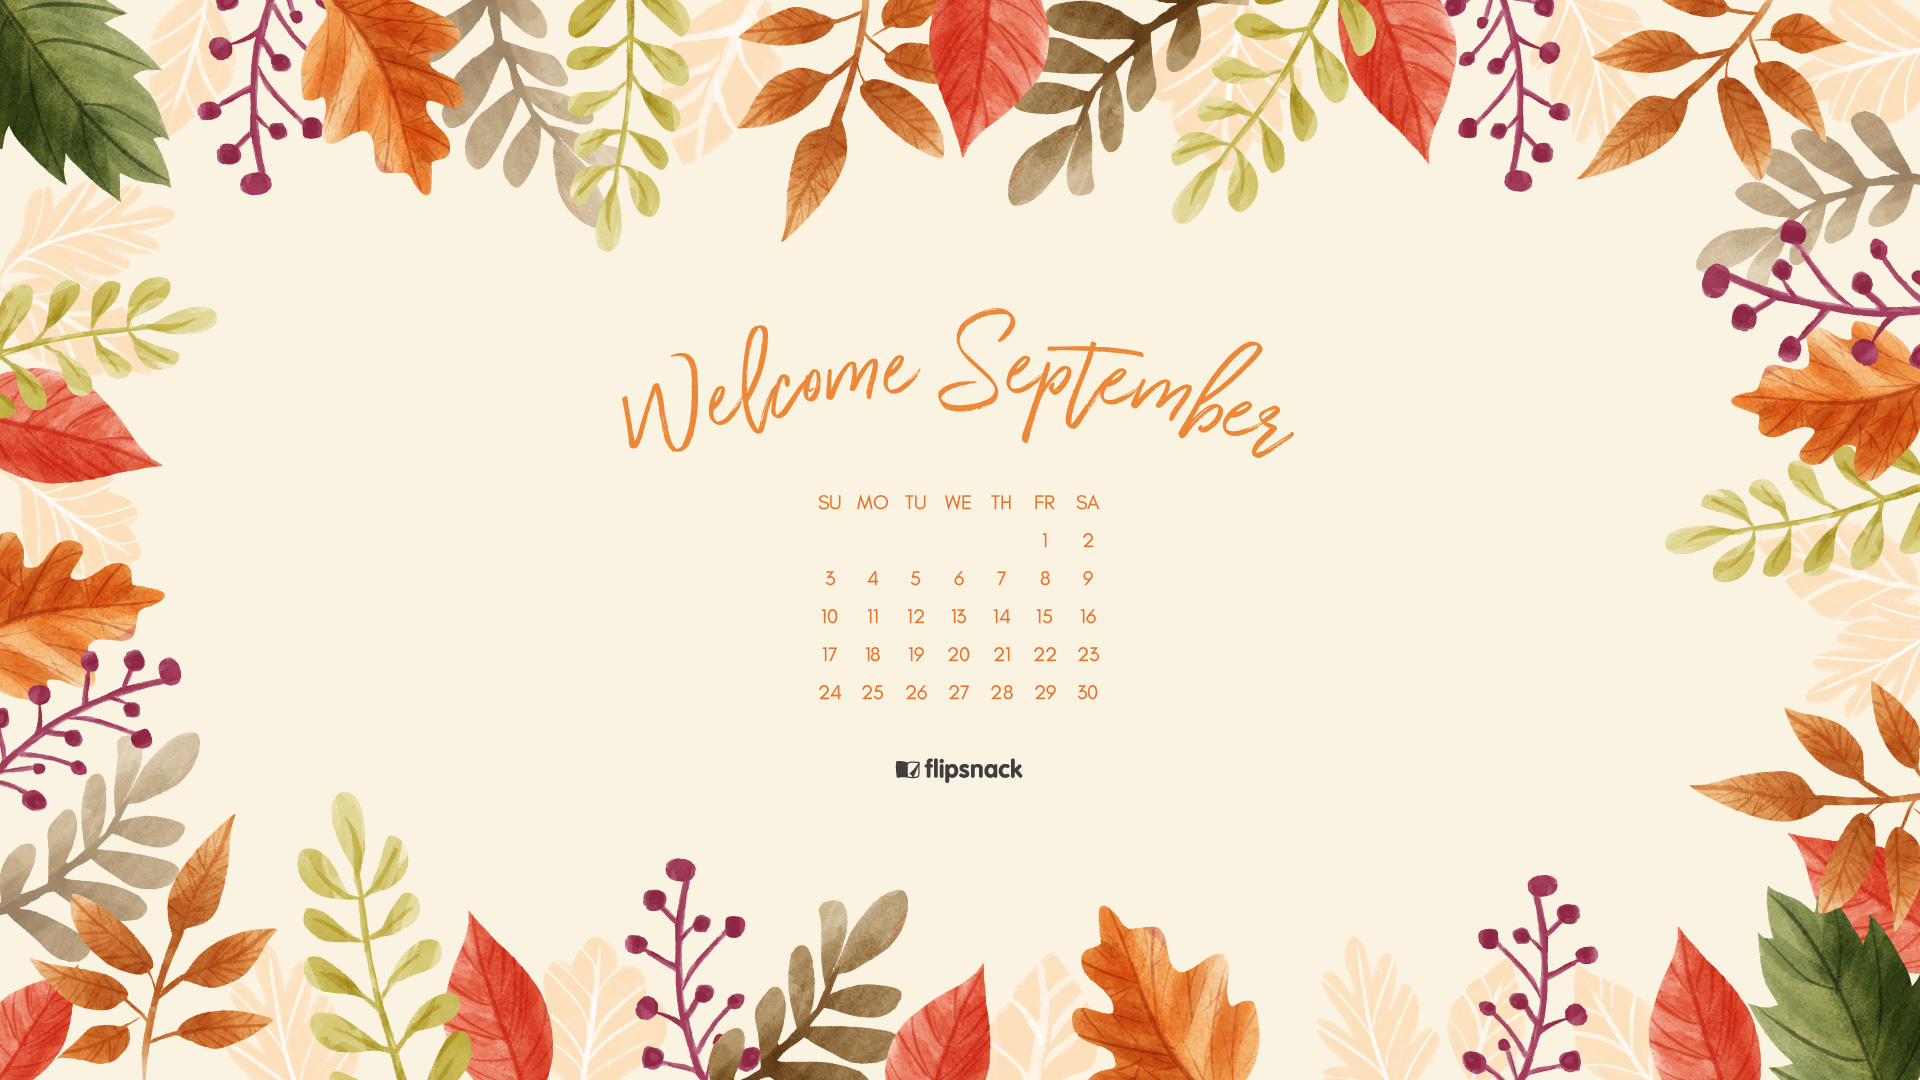 🔥 Download Your September Calendar Wallpaper Is Here Get It by